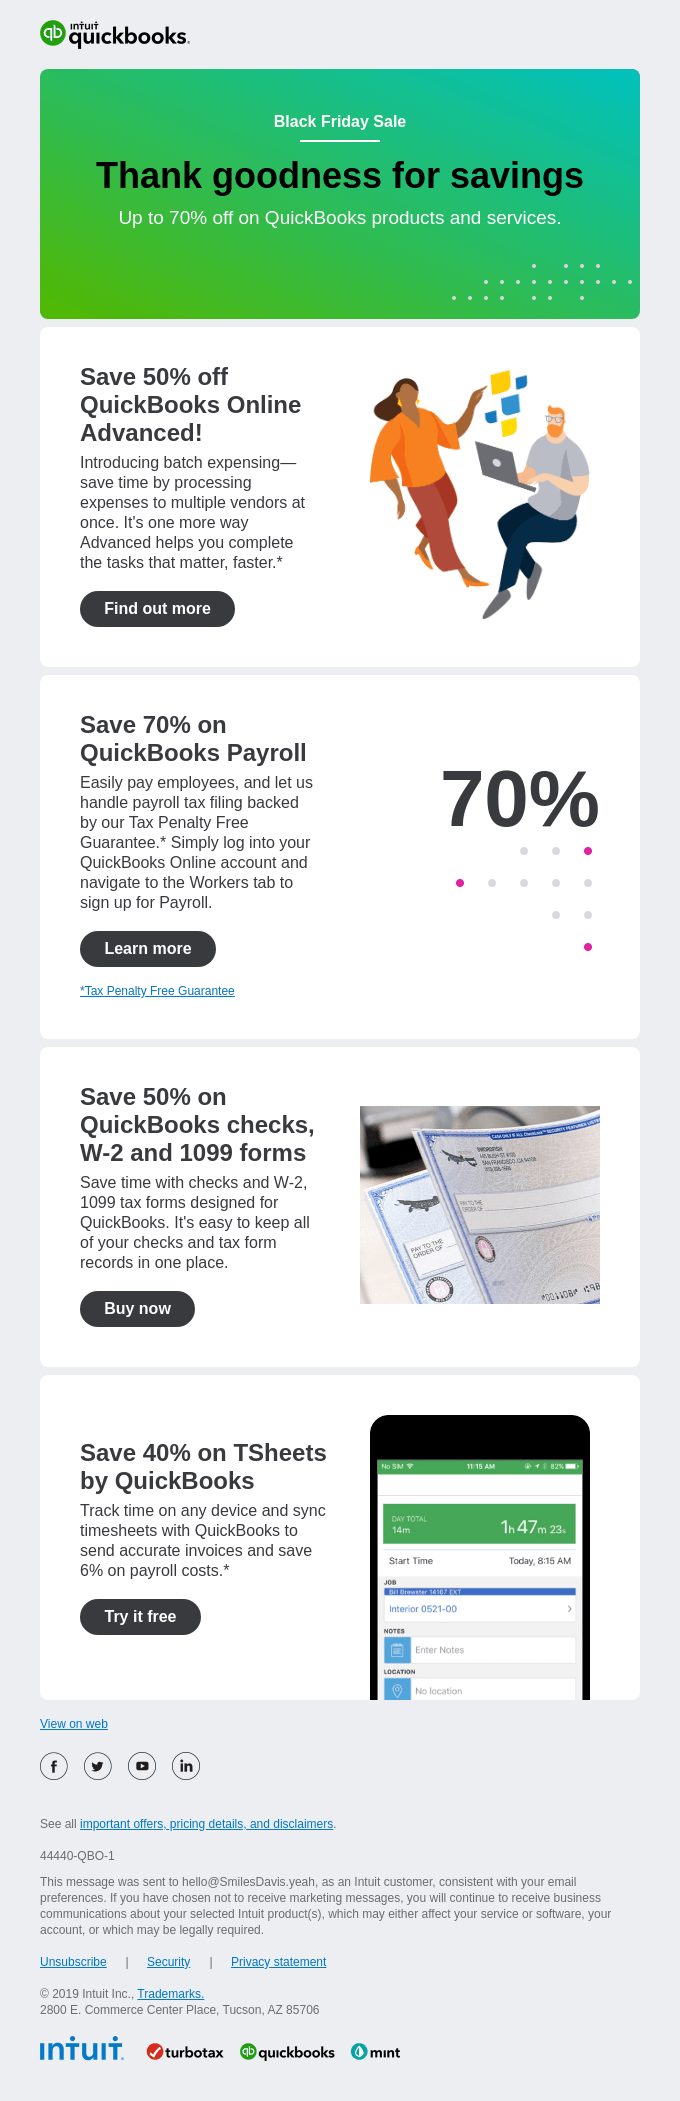 It's time to save big on QuickBooks